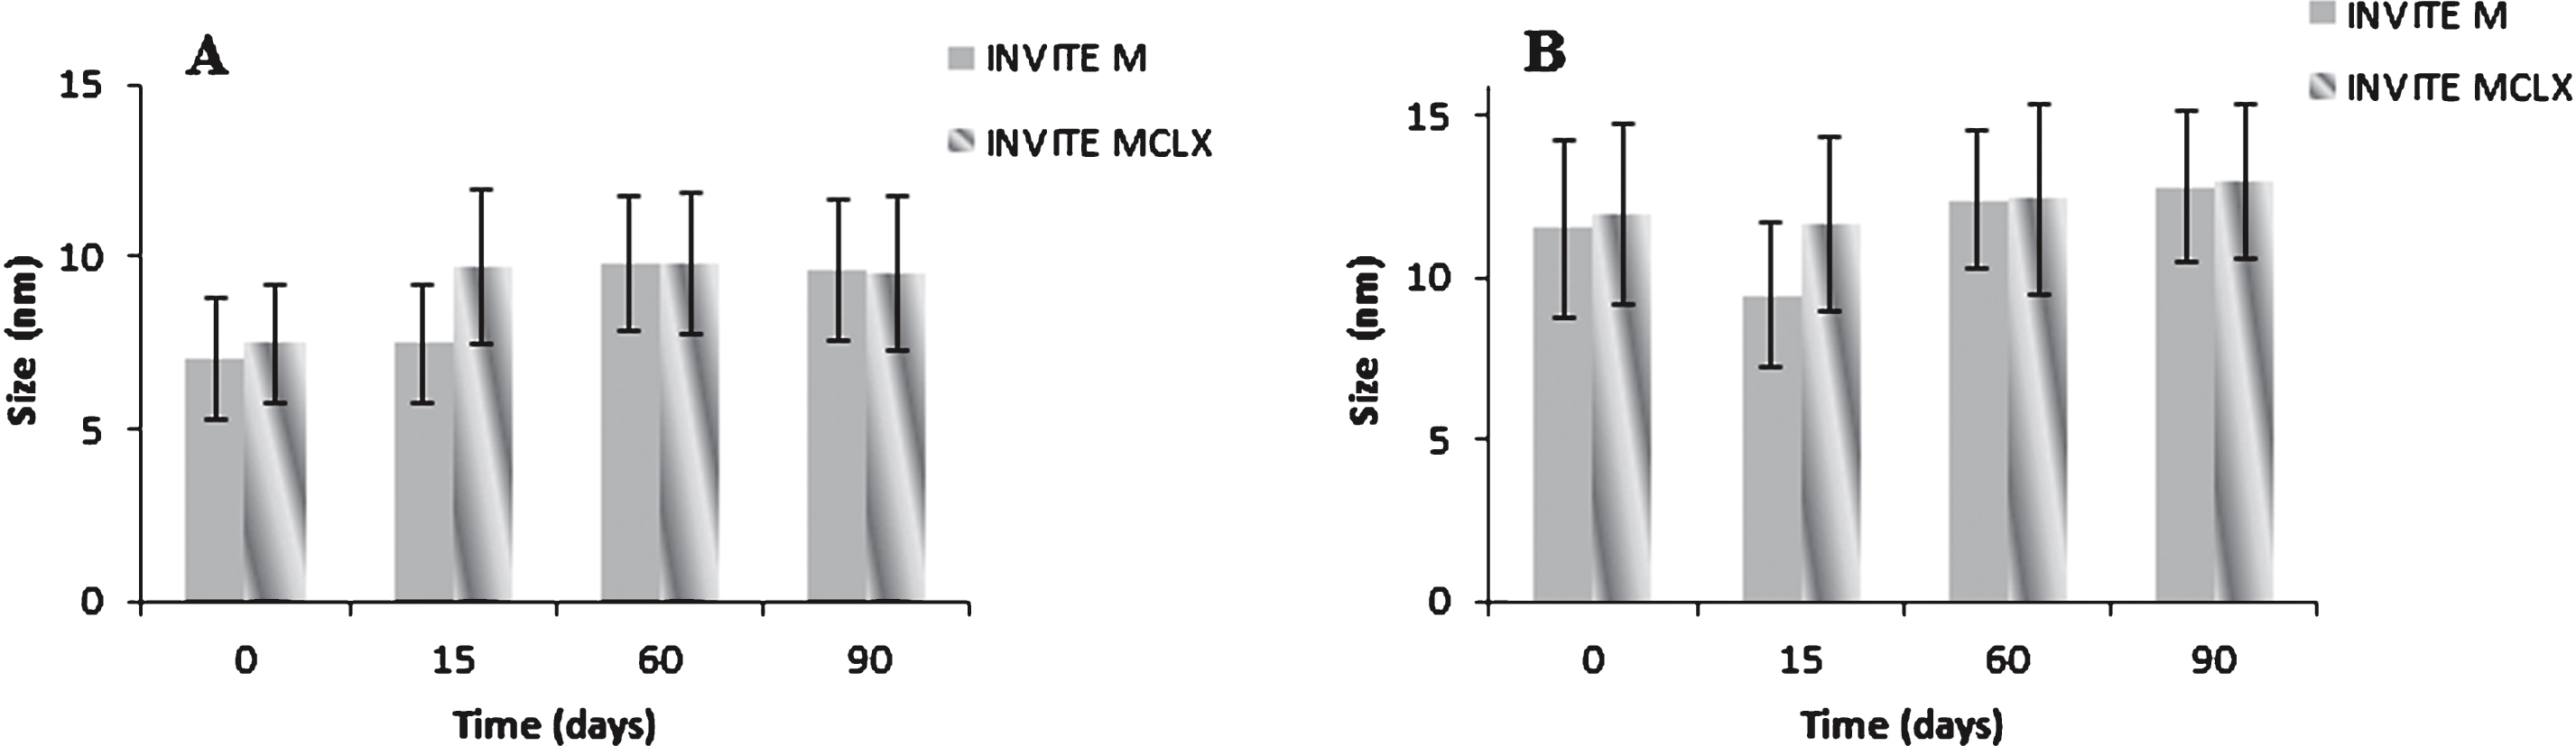 Stability study of empty INVITE M micelles and INVITE MCLX micelles loaded with CLX at 25°C up to 90 days in: A) ultrapure water; B) PBS pH 7.4.